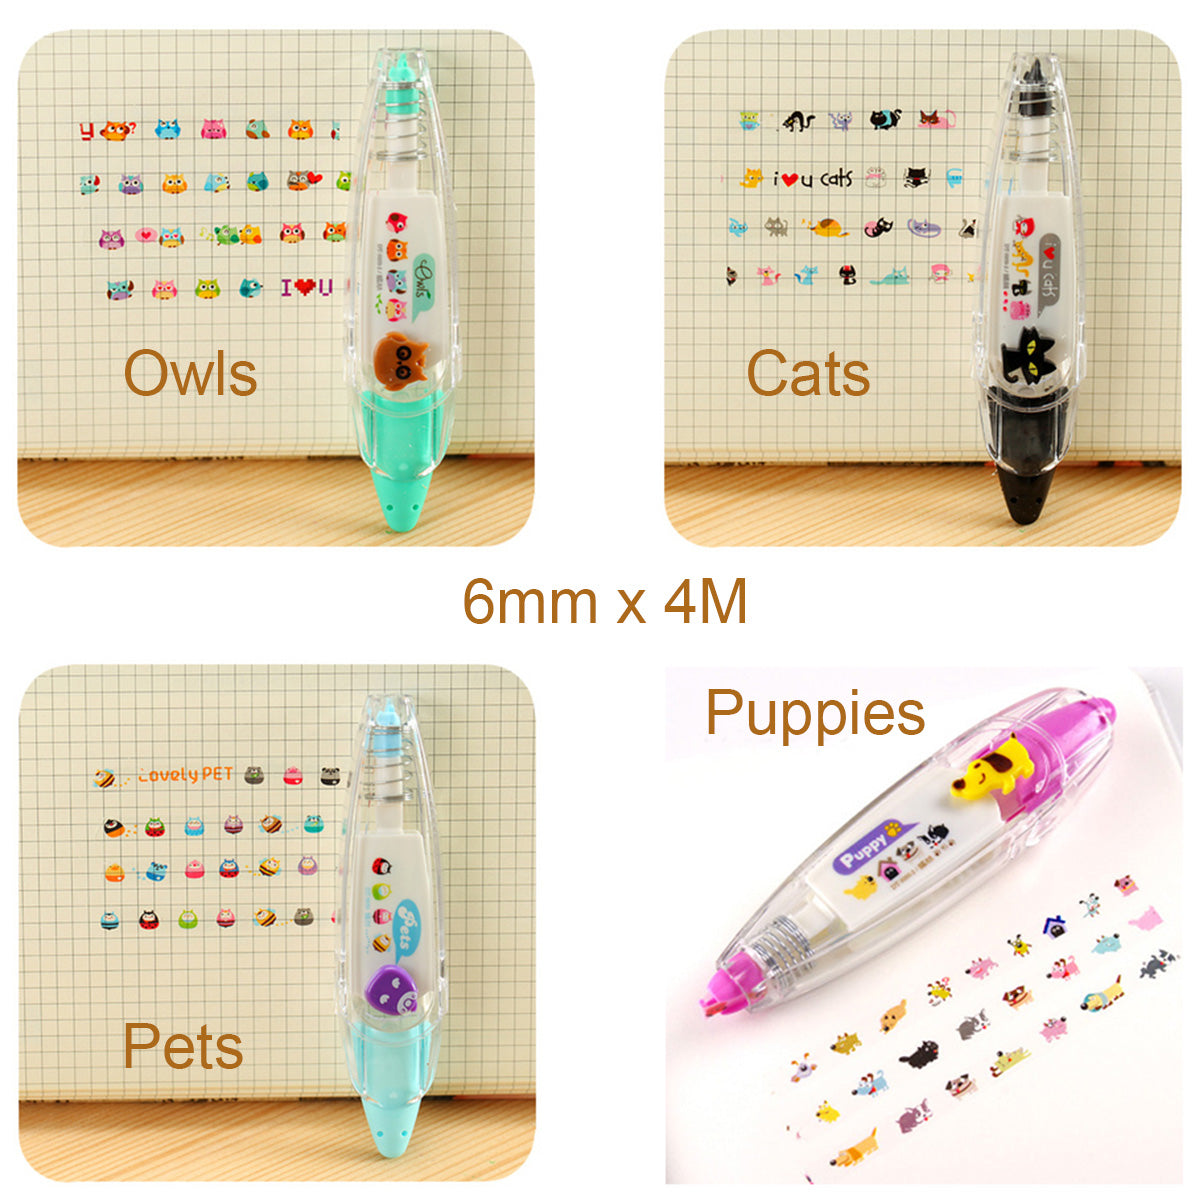 Wrapables Novelty Sticker Machine Pens, Decorative Stationery Supplies for Home Office School